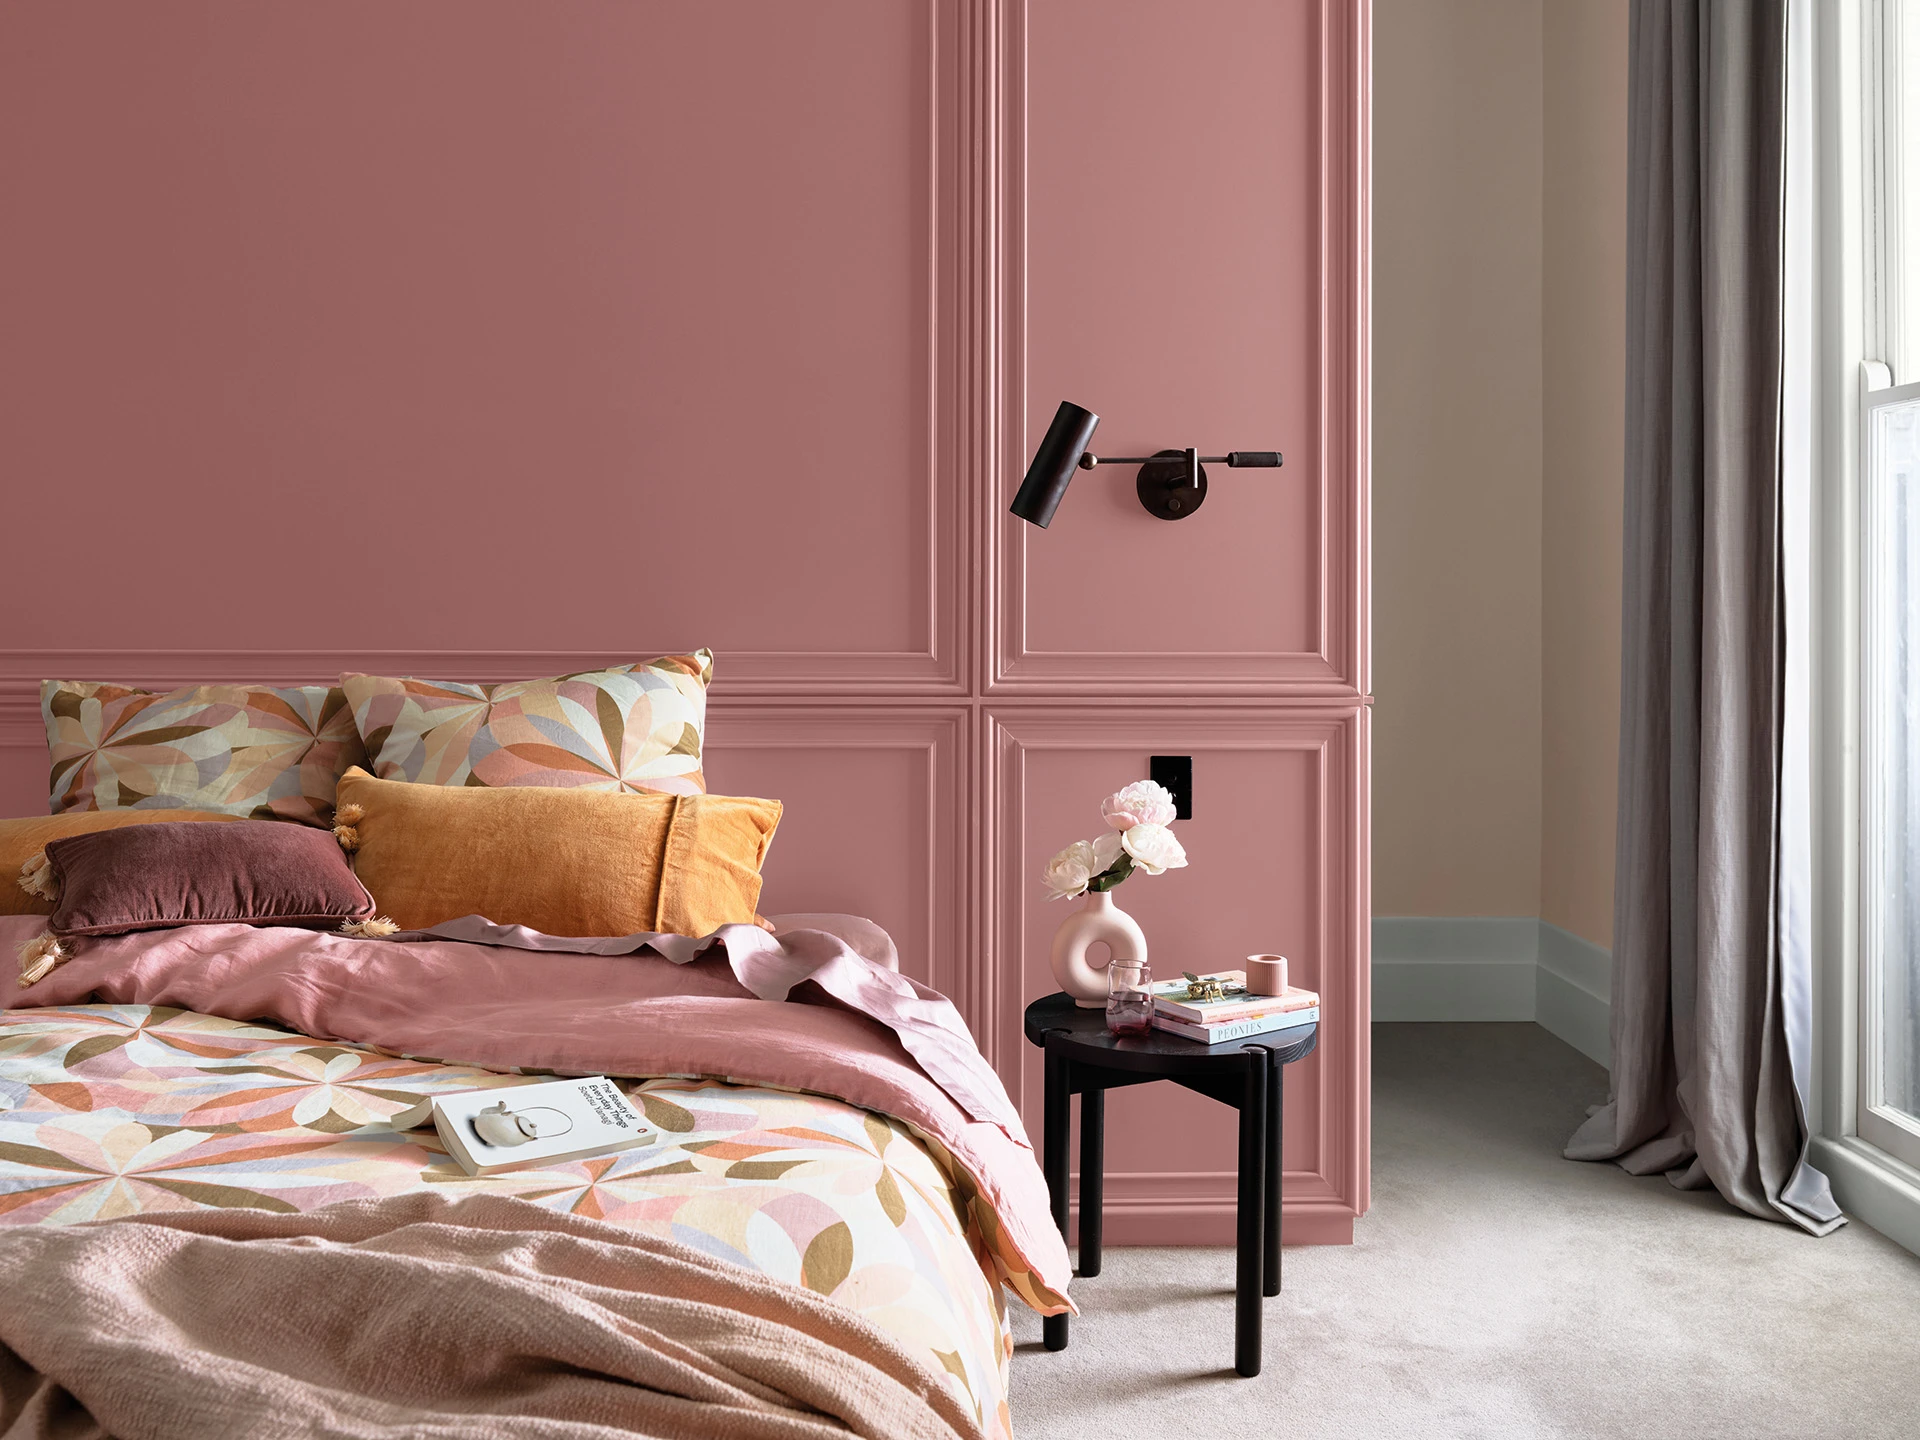 Pink shade bed with side table, books sitting on messily made bed. 